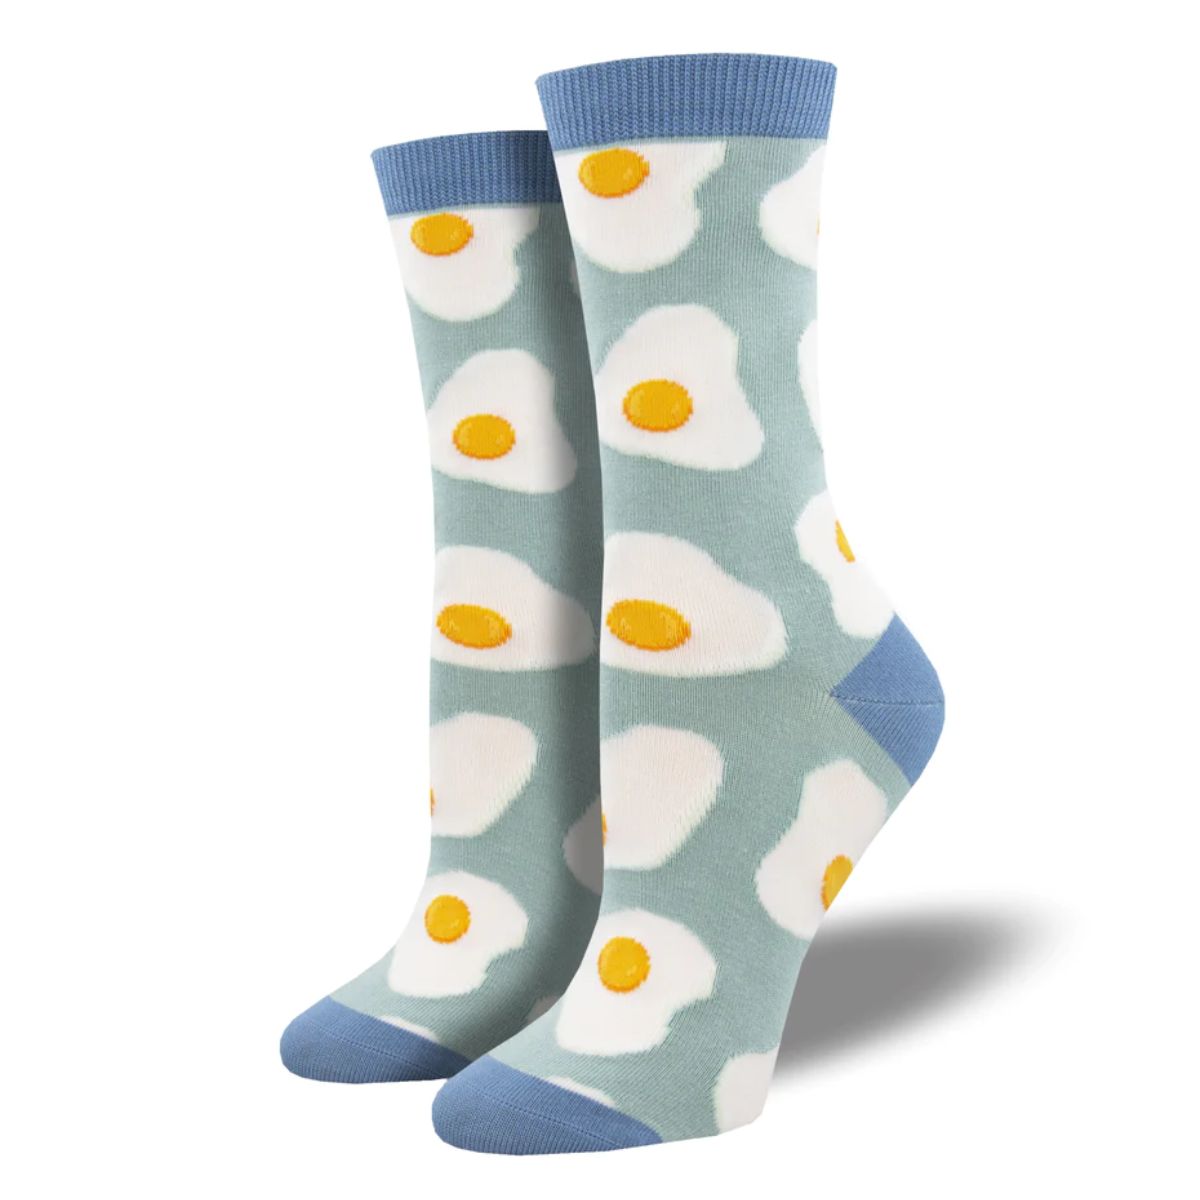 Sunny side up socks a pair of blue crew socks with sunny side up egg print